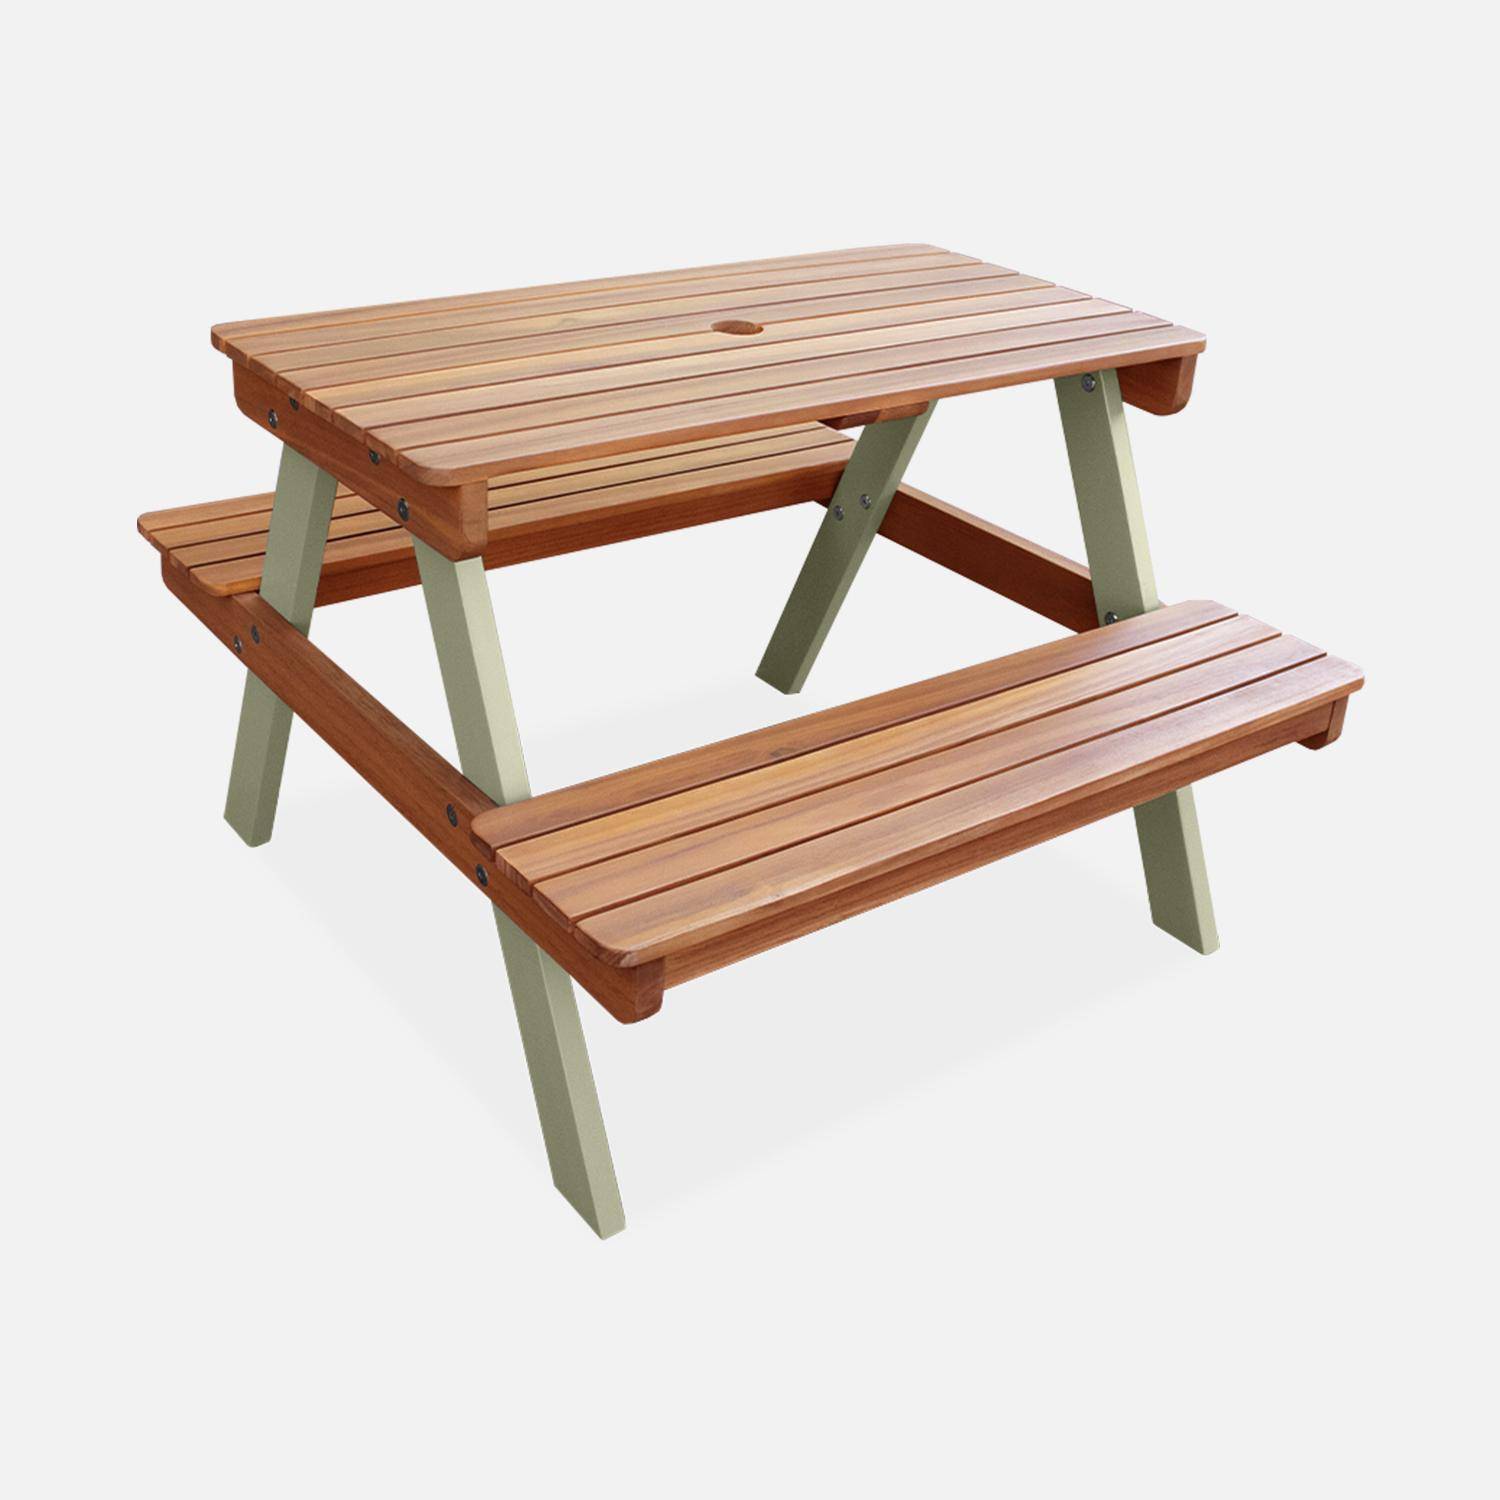 Acacia wood picnic table for children, 2 places, colour light teak and grey green Photo3